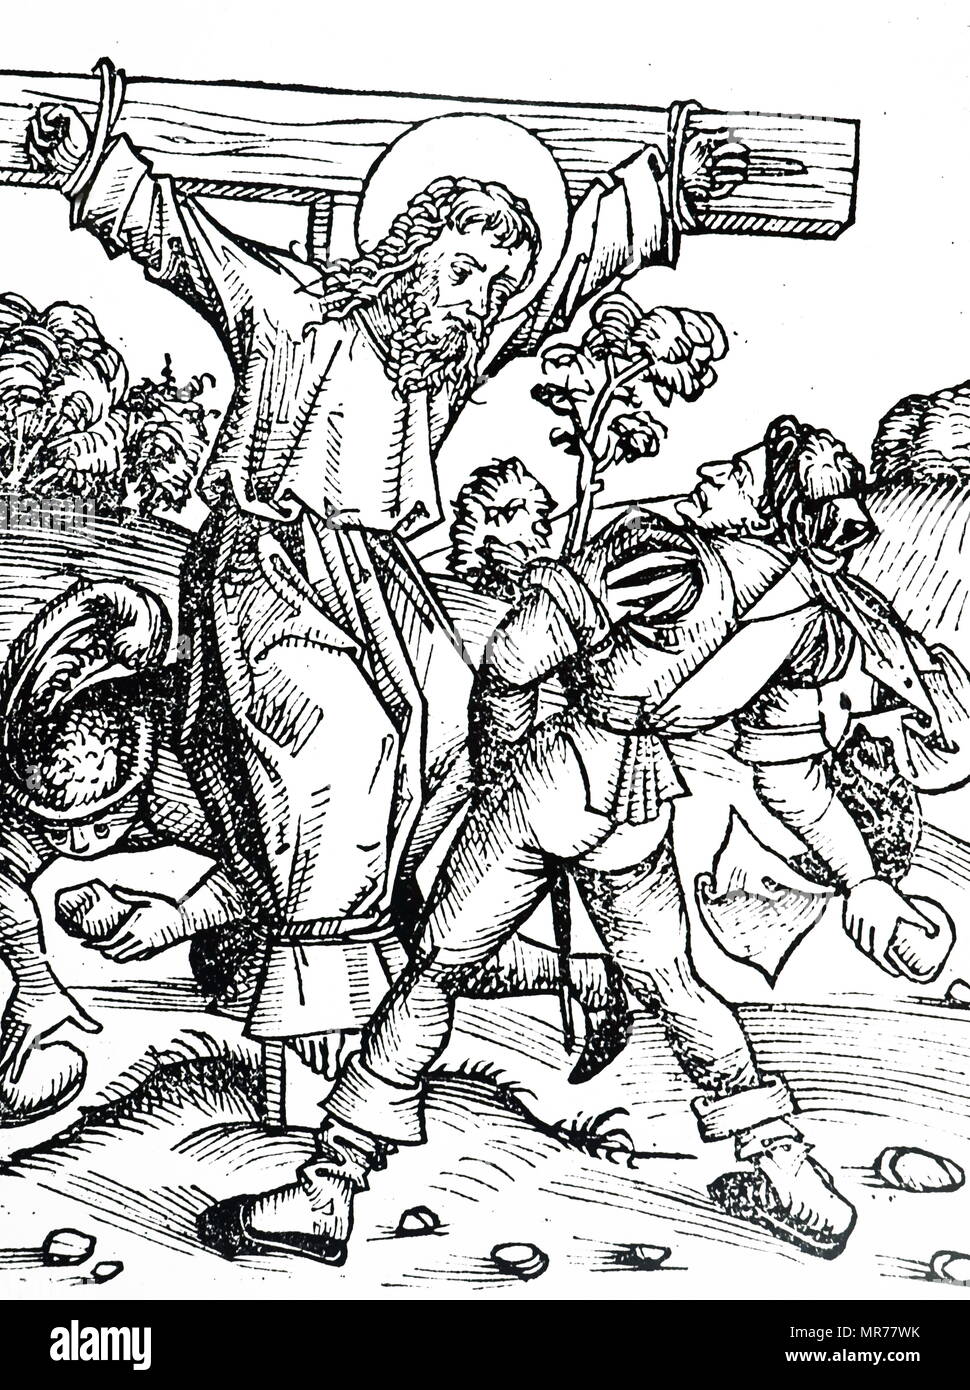 Woodcut engraving depicting the martyrdom of the Apostle Philip. Dated 15th century Stock Photo